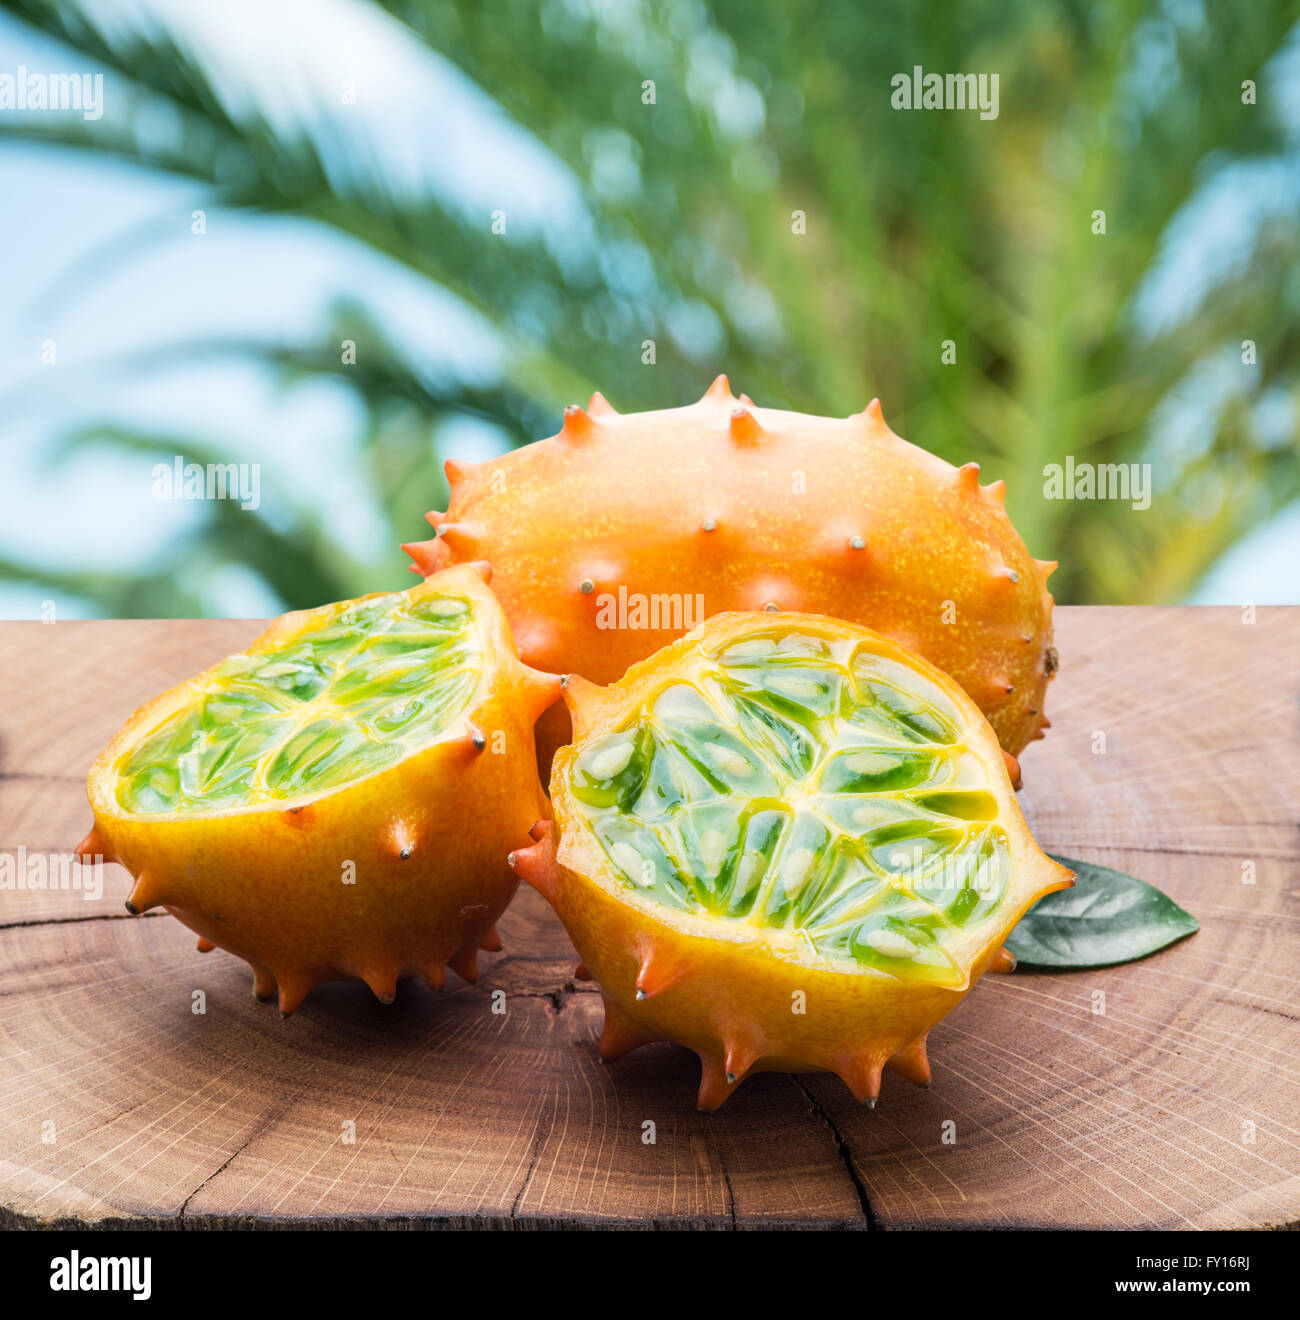 Kiwano fruits on the wooden table with green nature on the background. Stock Photo